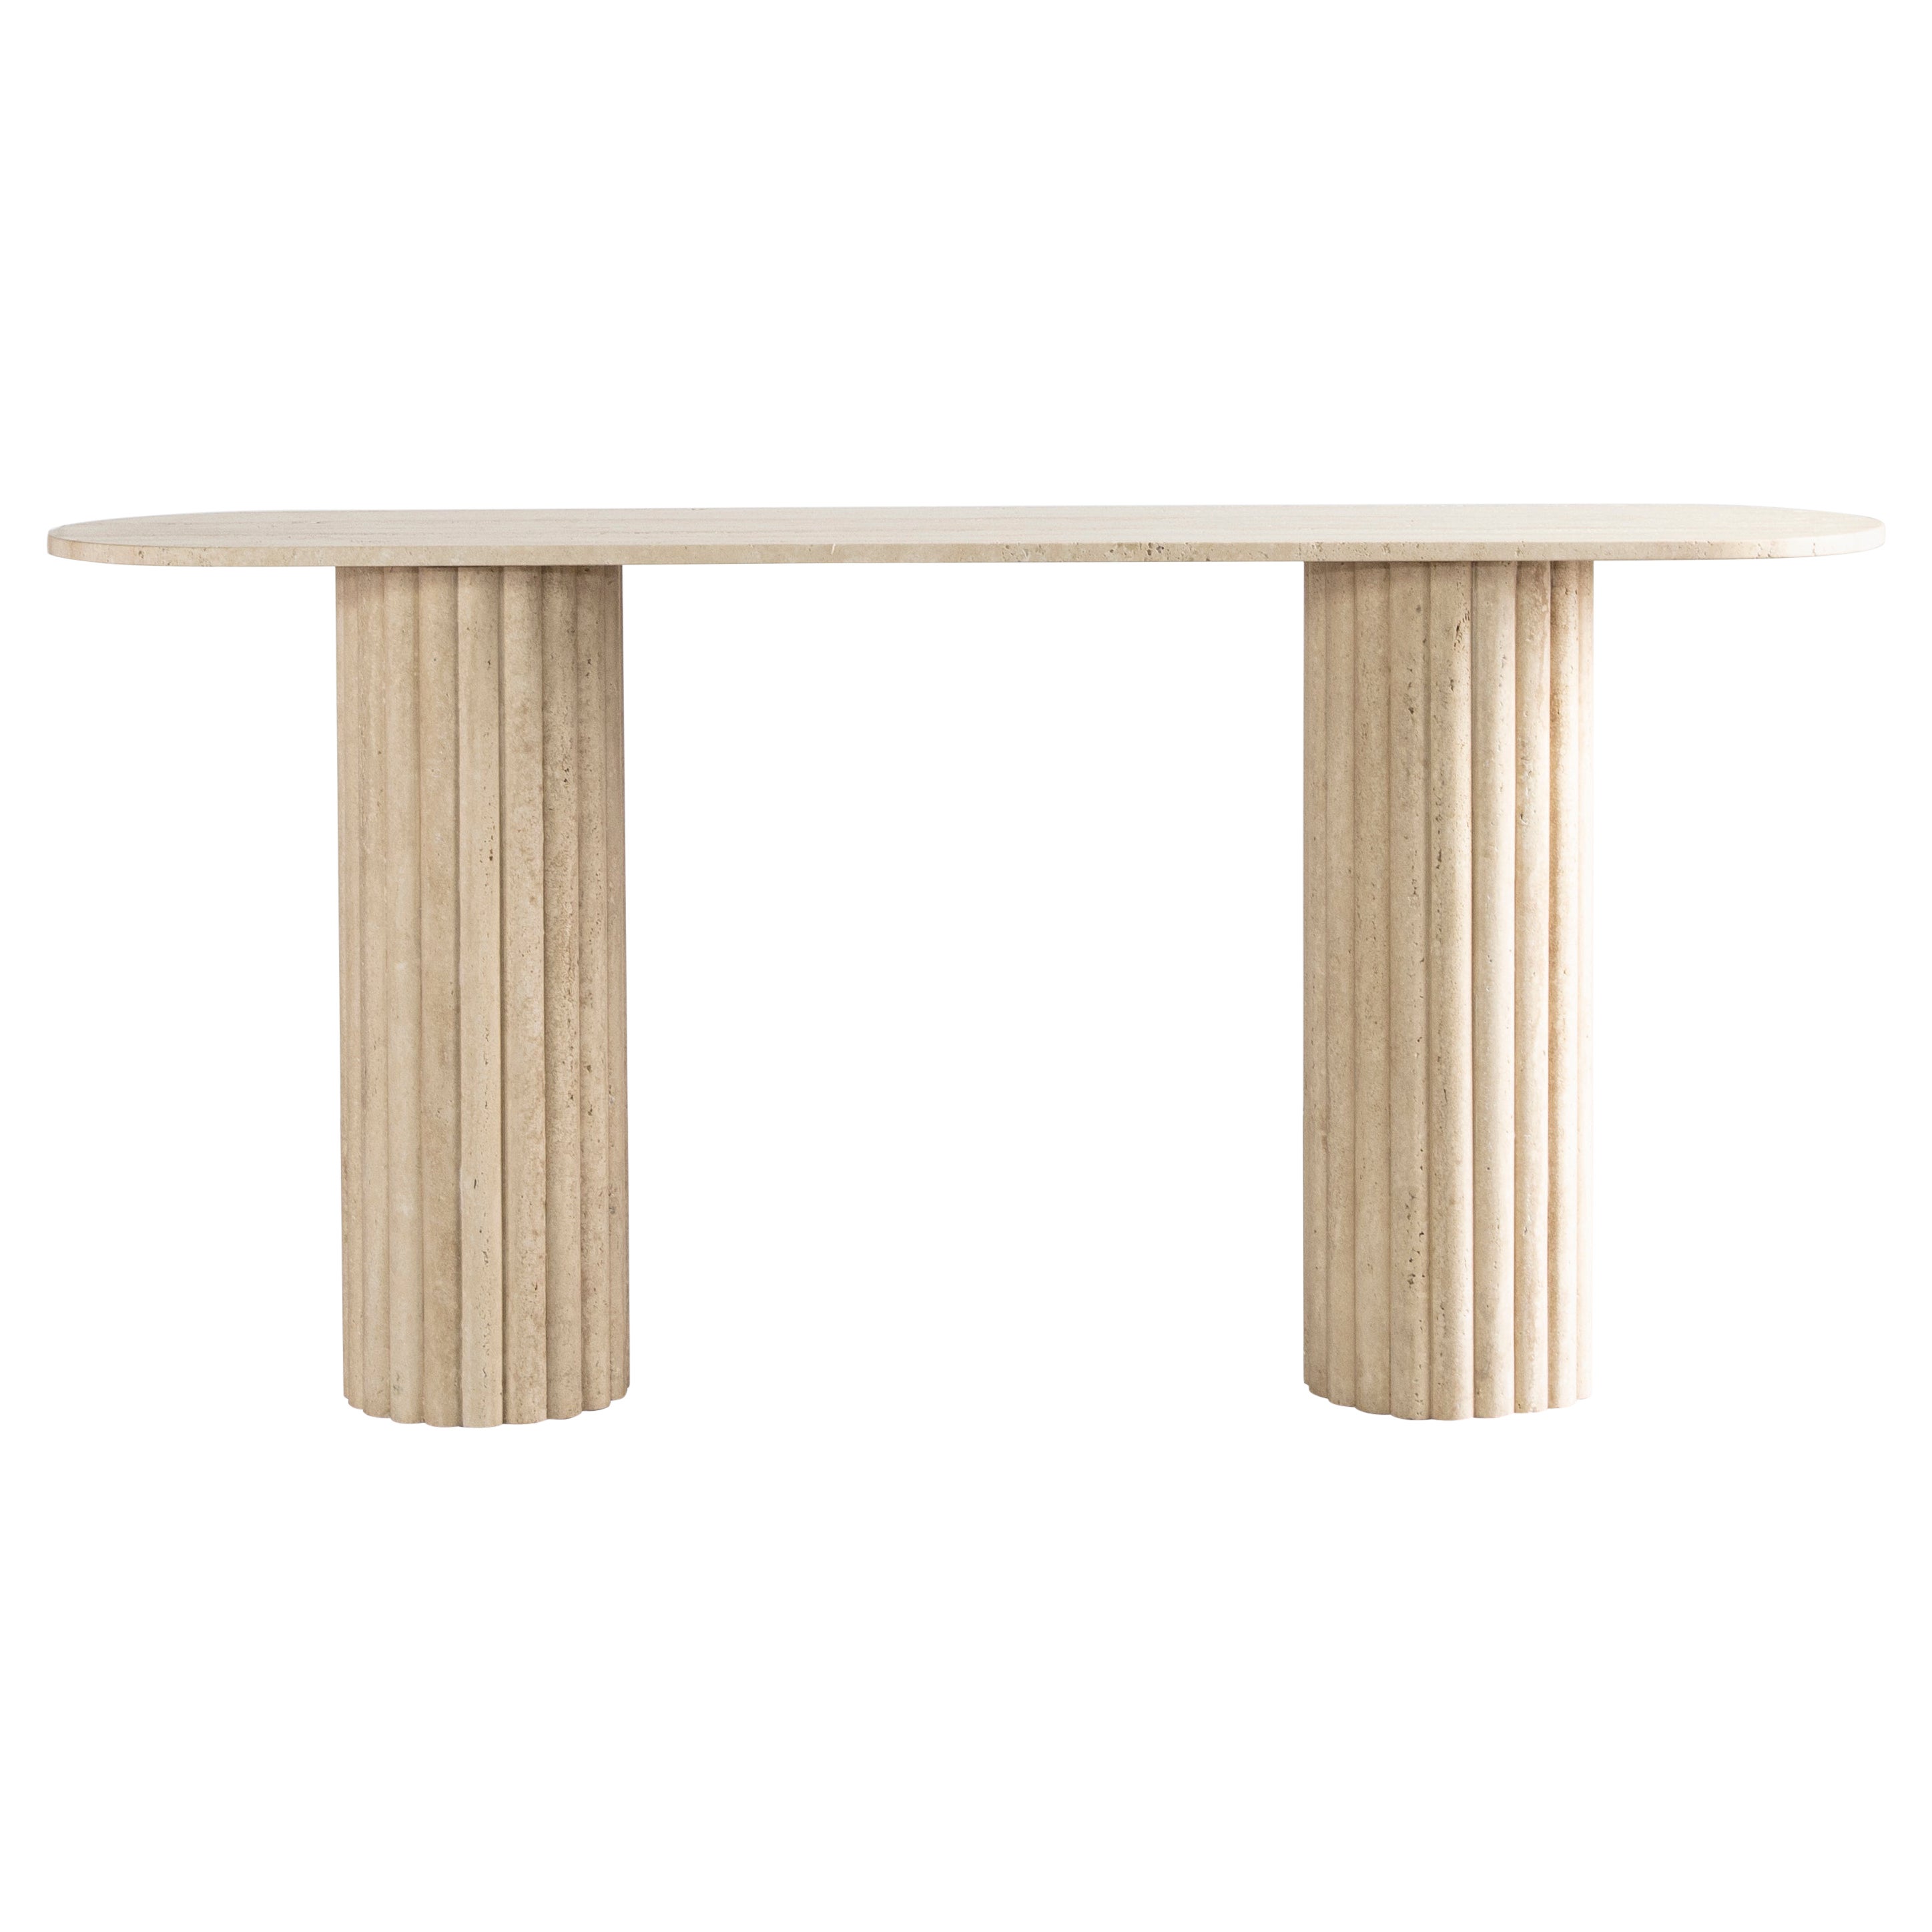 Rima Console Table in Travertine Marble, Made in Mexico by Peca